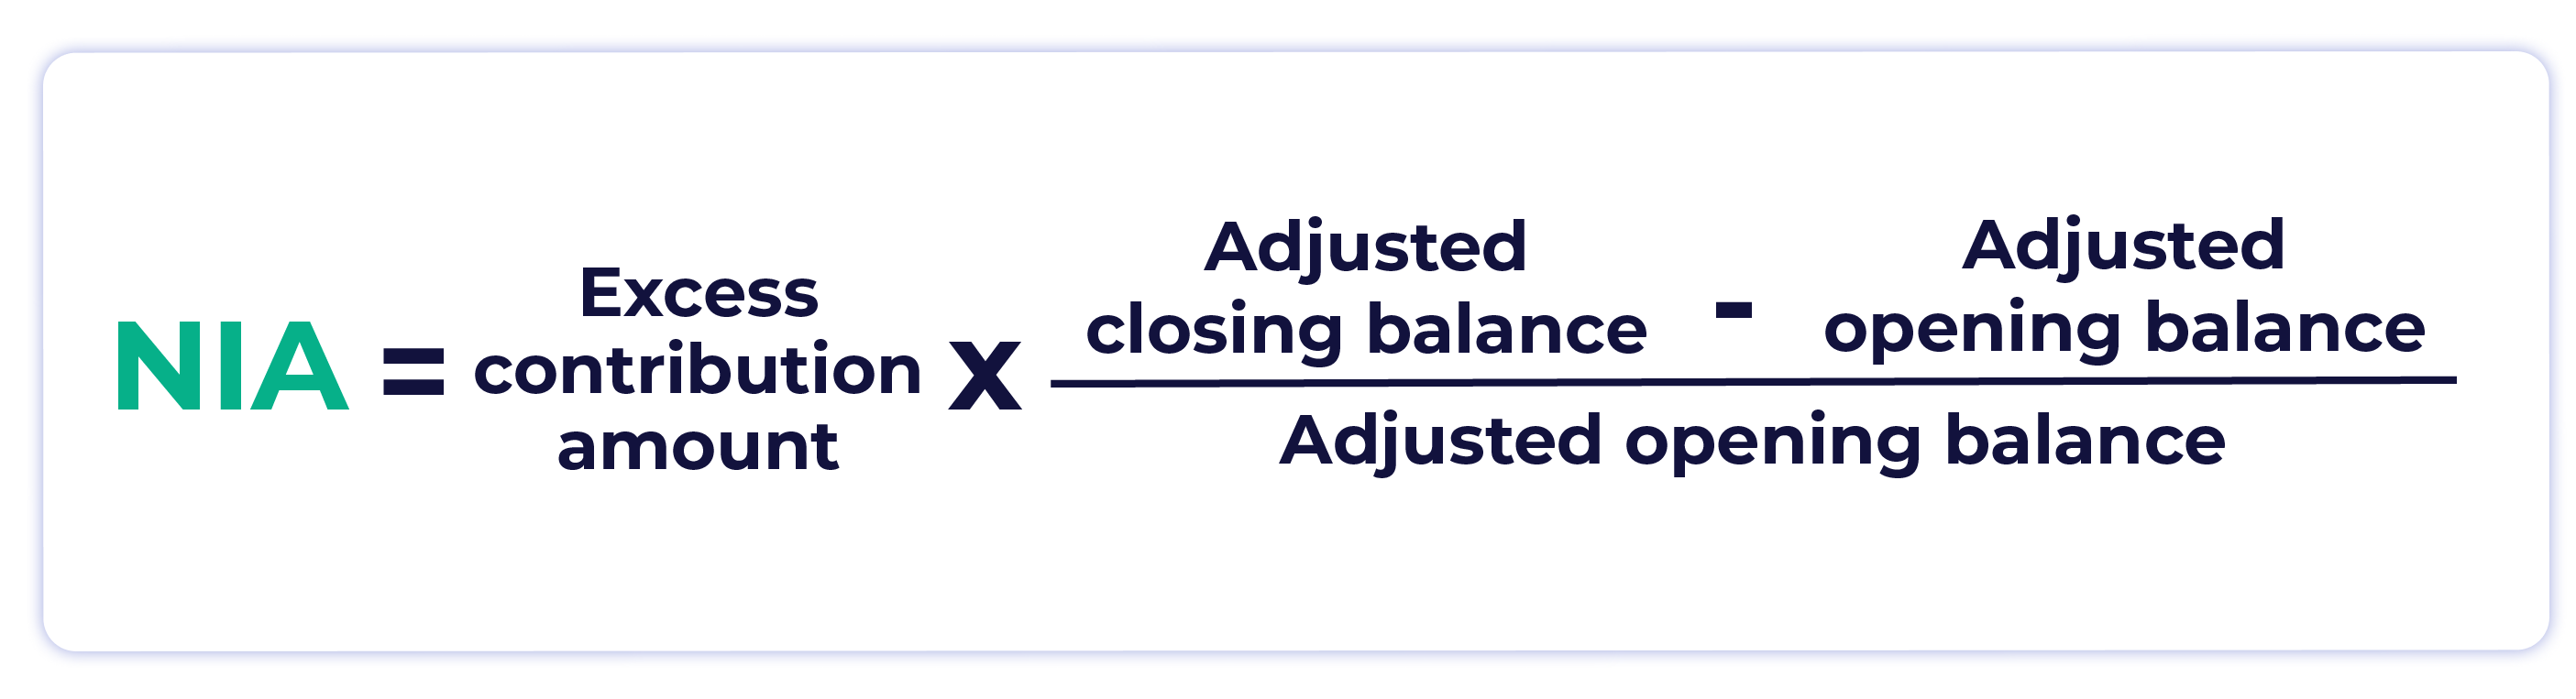 Net Income Attributabe= excess contribution amount x ((Adjusted Closing Balance – Adjusted Opening Balance)/Adjusted Opening Balance)